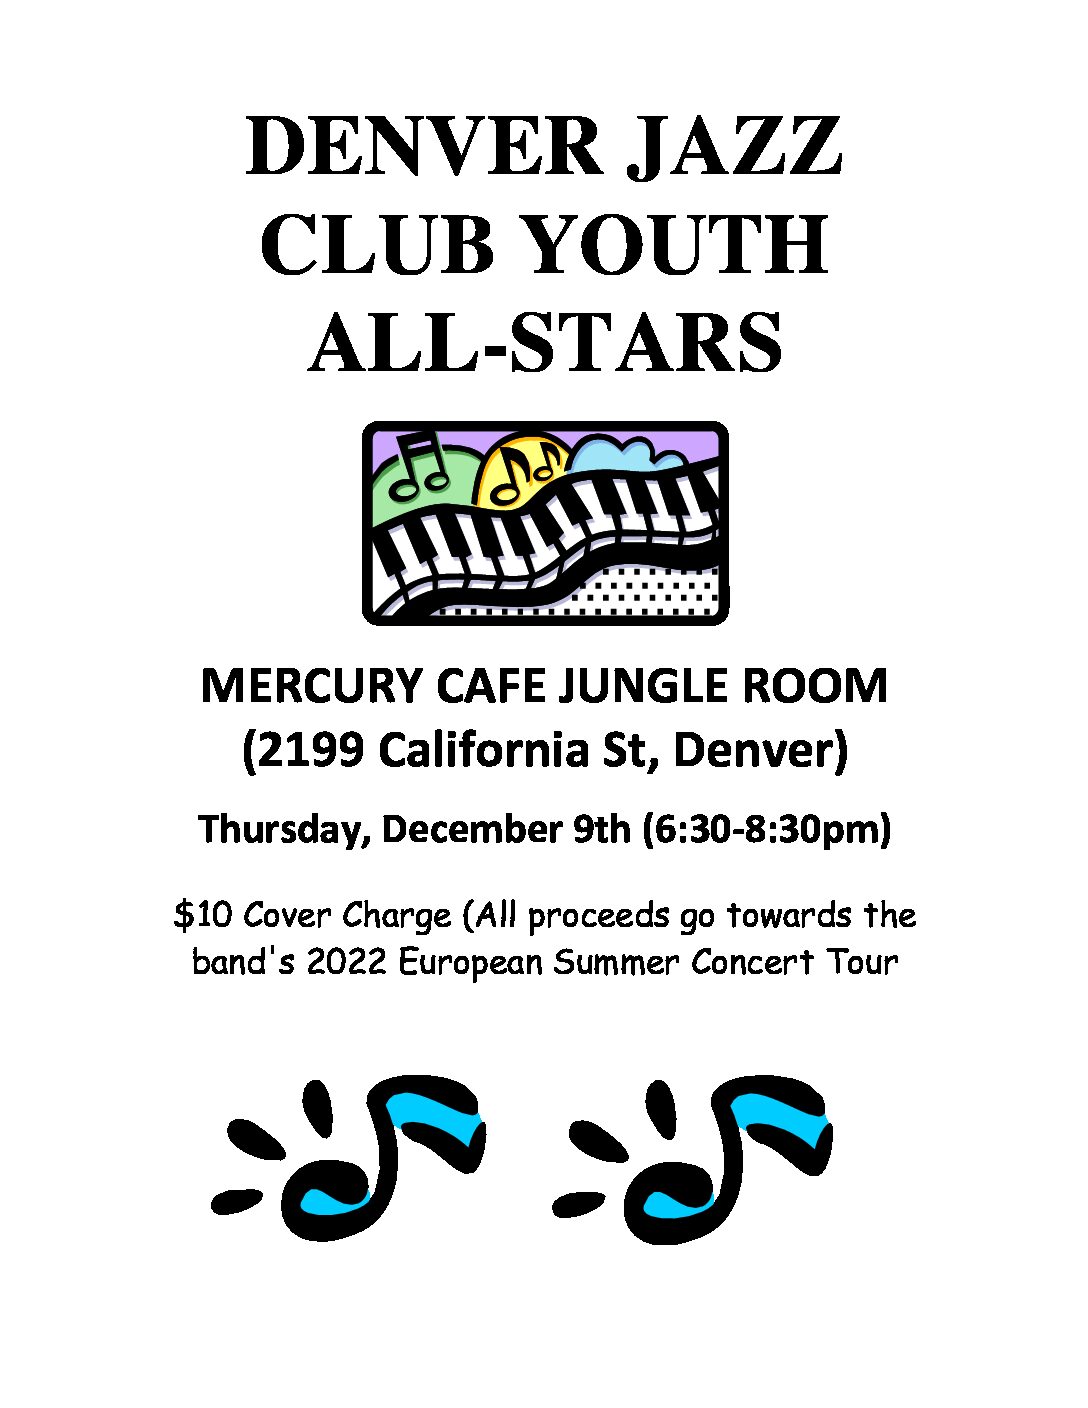 Denver Jazz Club Youth All-Stars To Perform at the Mercury Cafe on Thursday, December 9th (6:30-8:30pm)